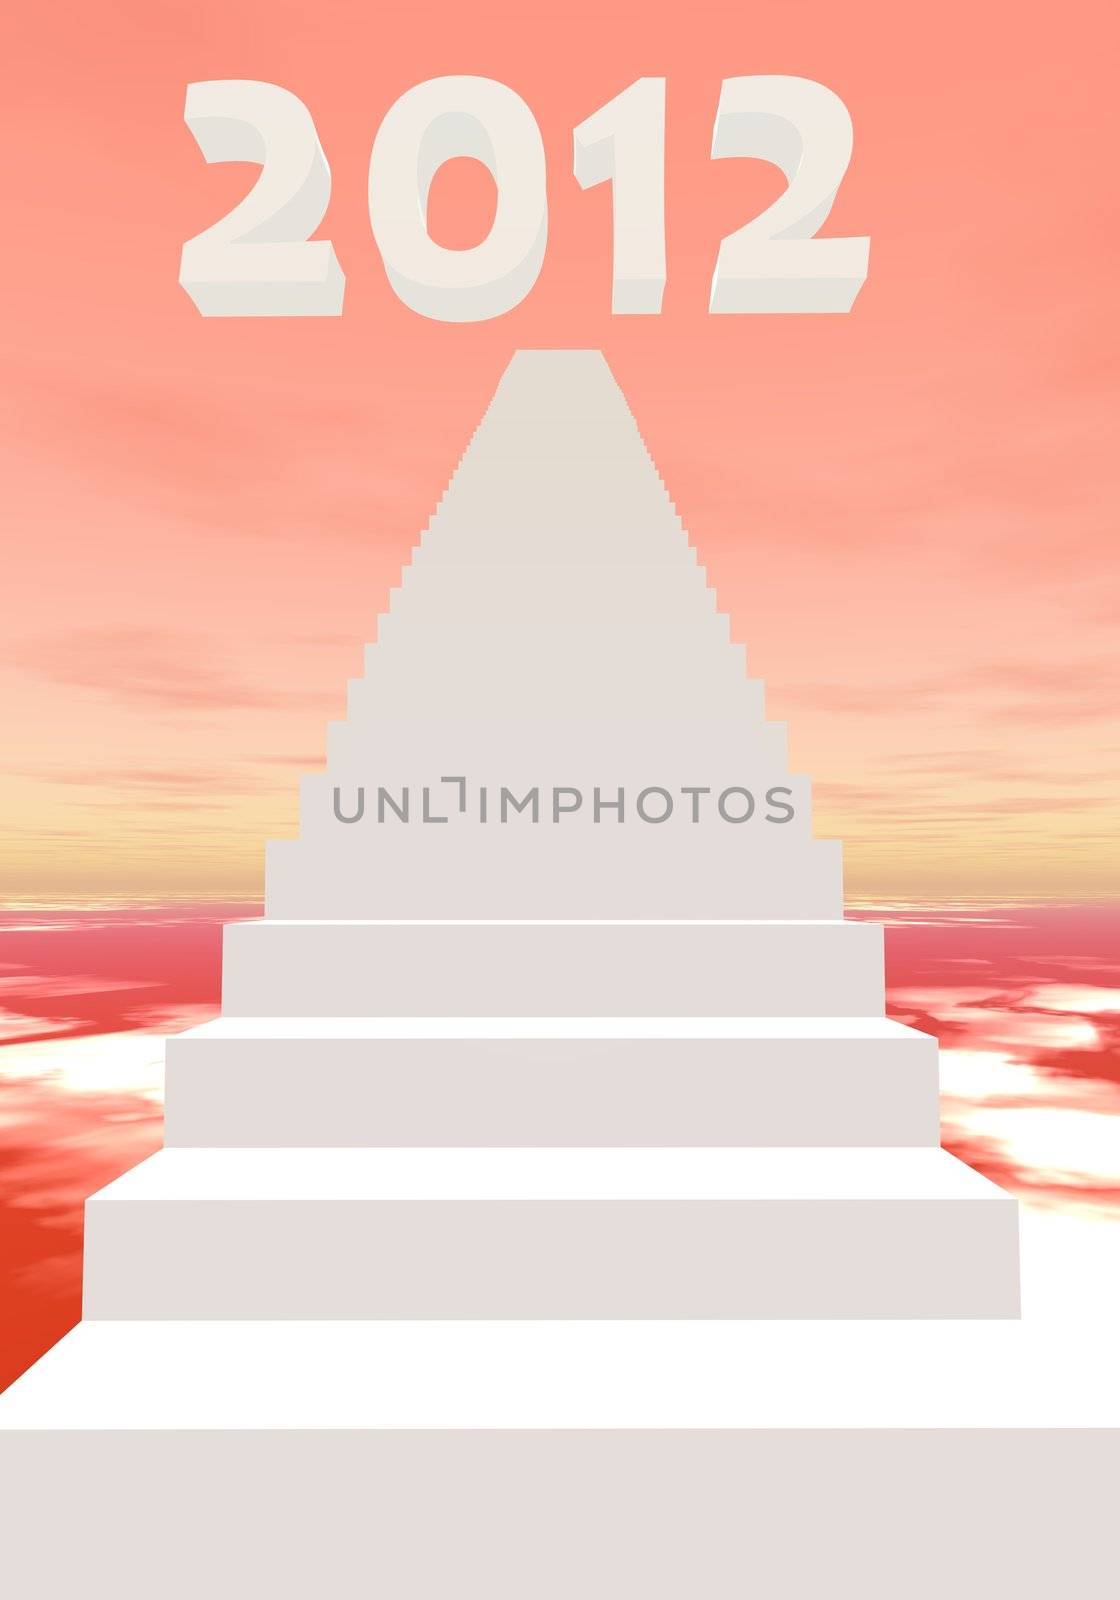 White stairs leading to 2012 in a colored background